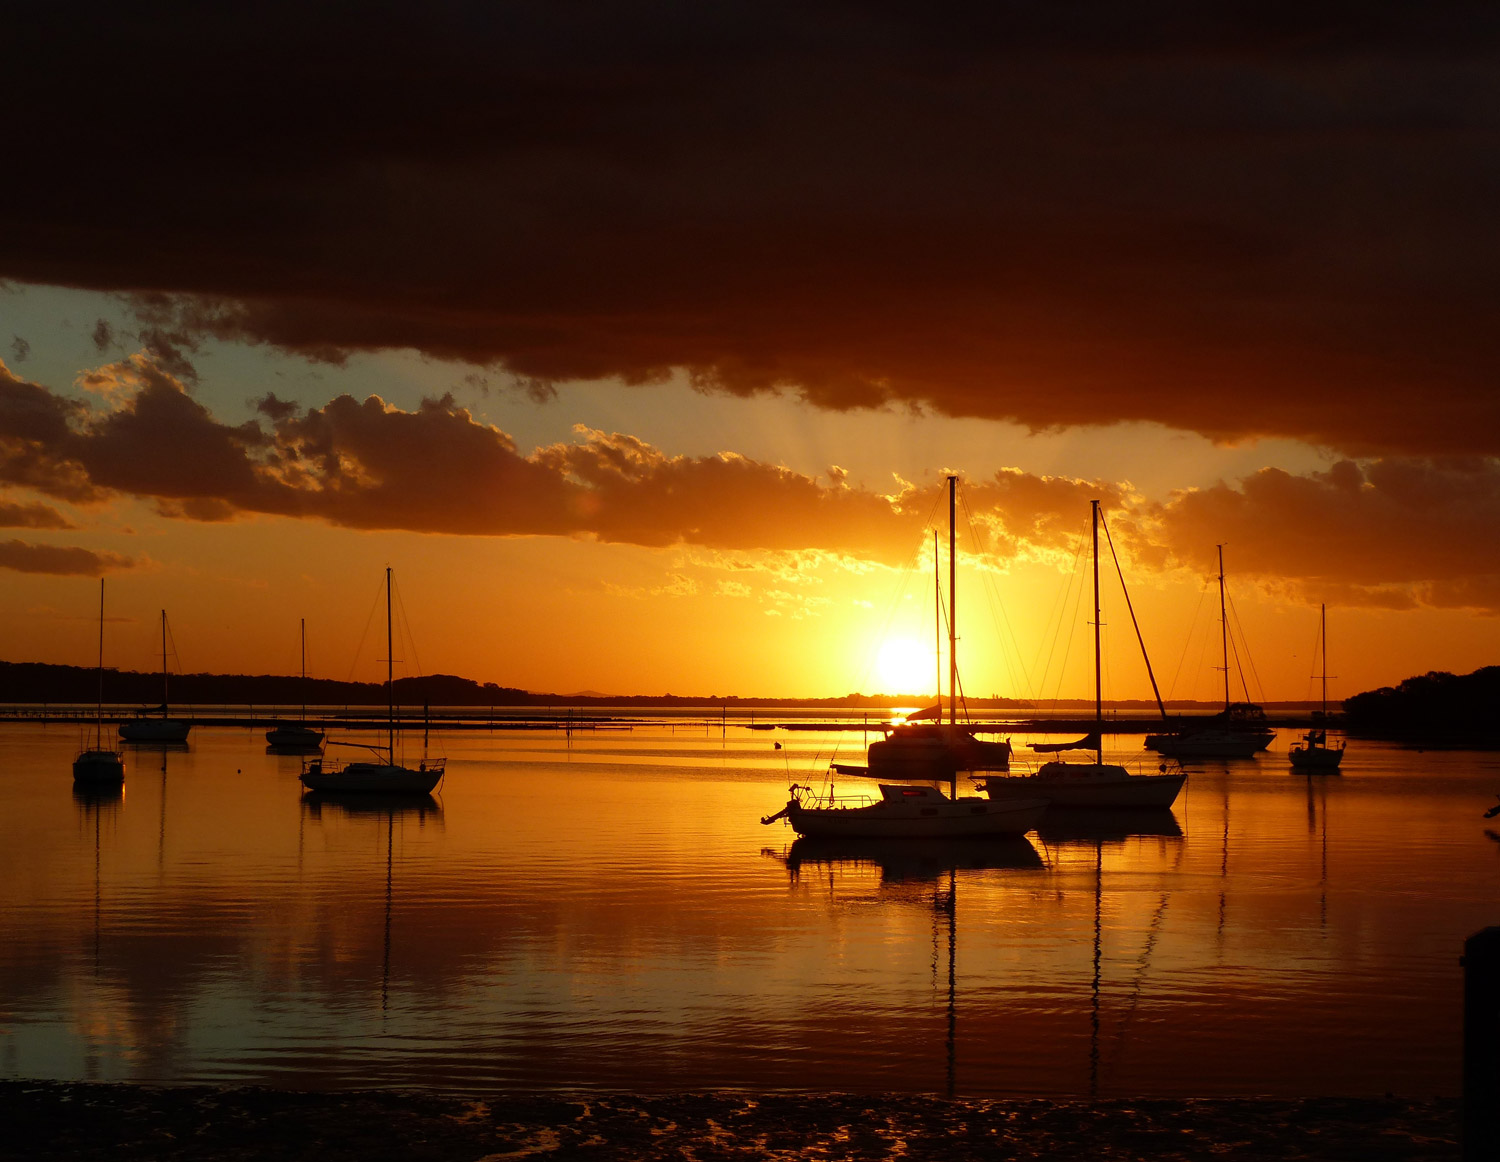 Sunset at Soldiers Point, Port Stephens, Australia